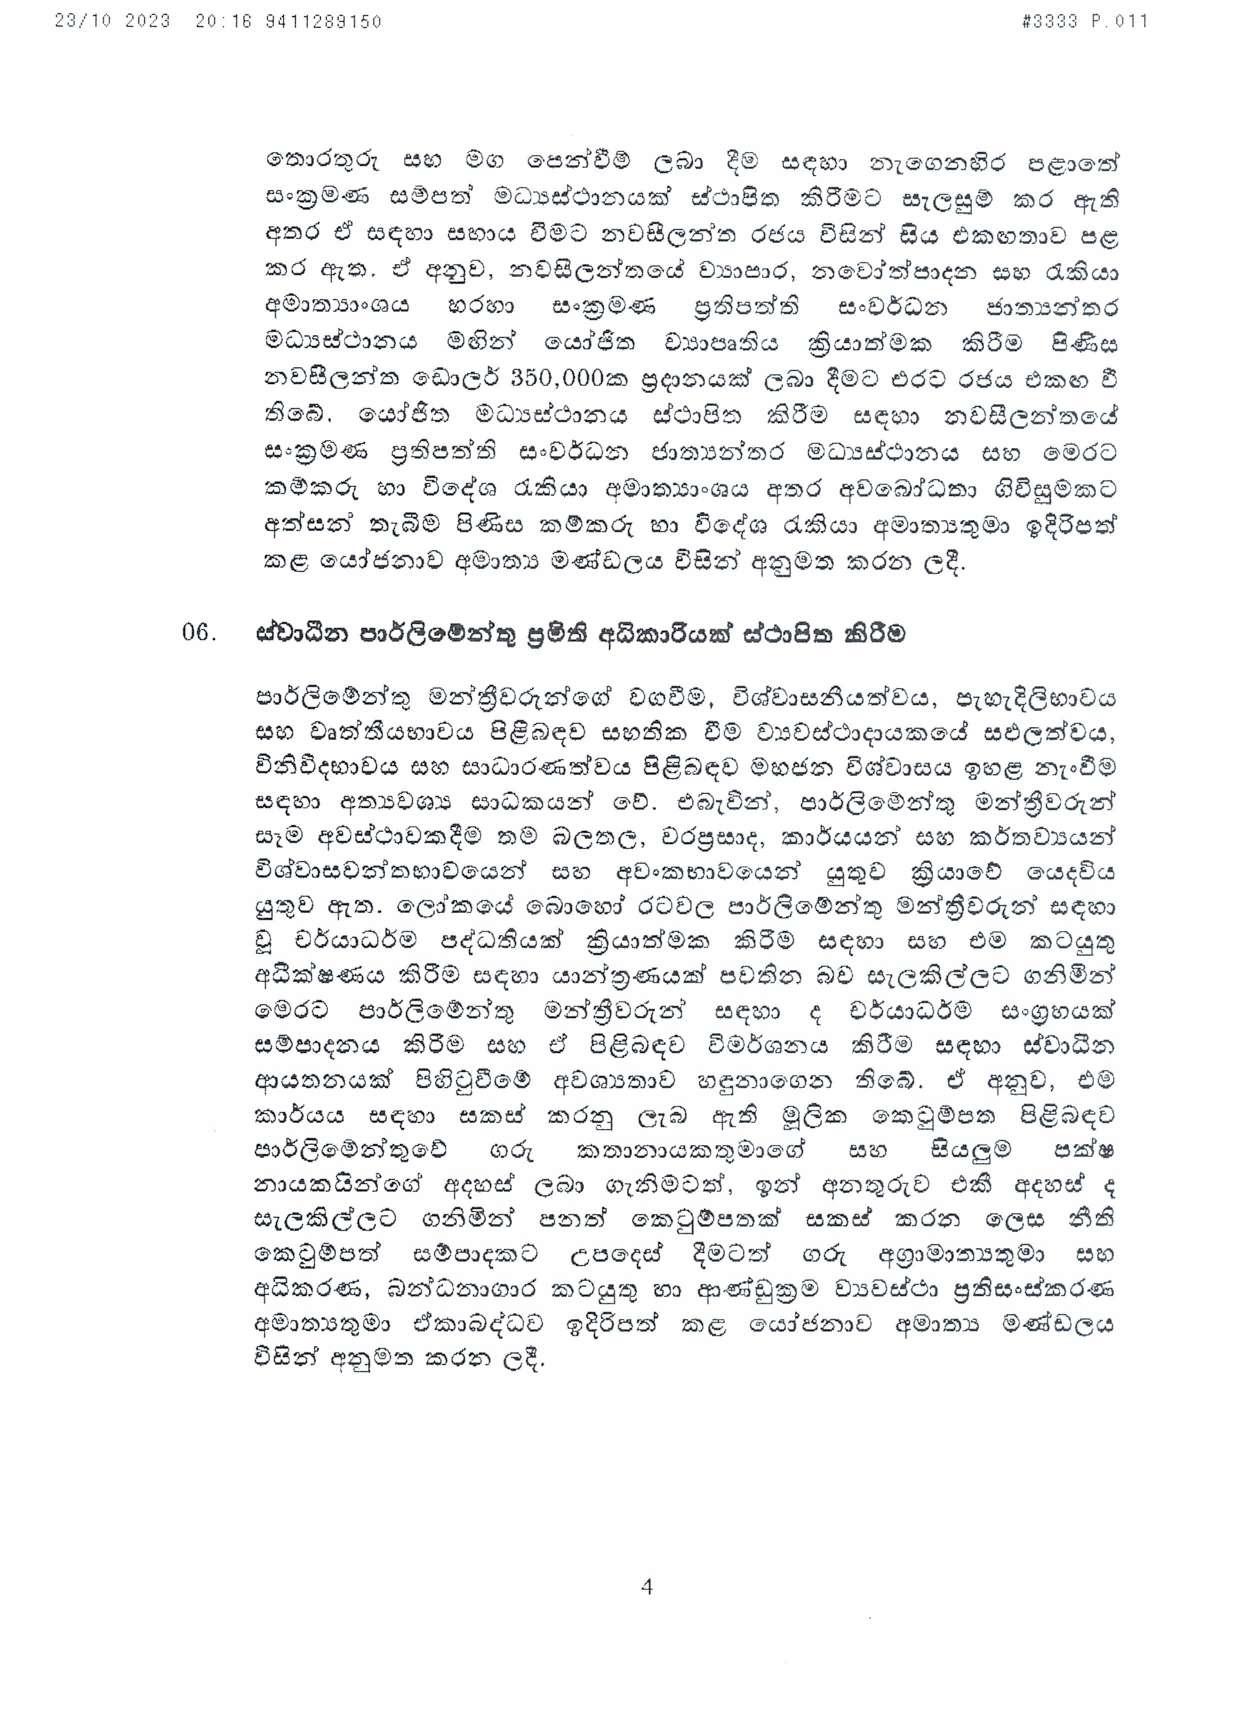 Cabinet Decision on 23.10.2023 page 004